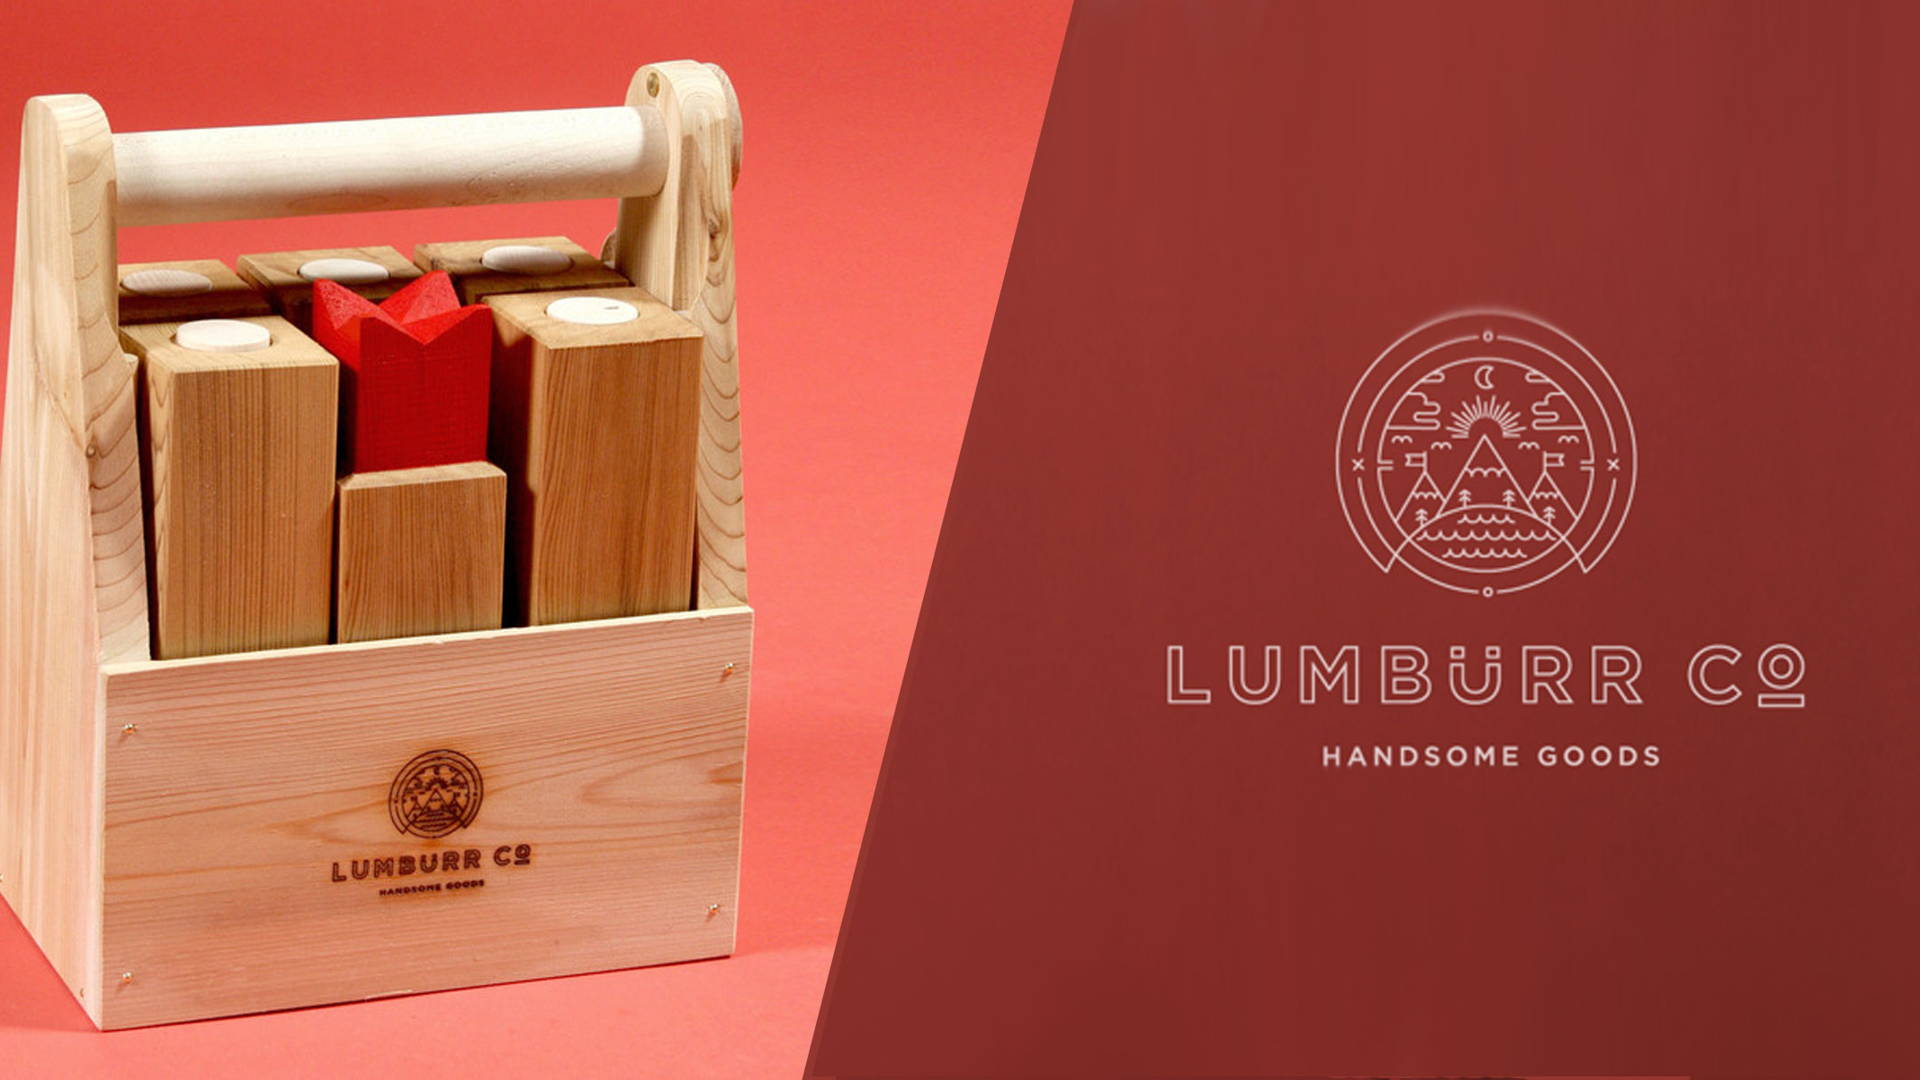 Featured image for Lumbürr Co.